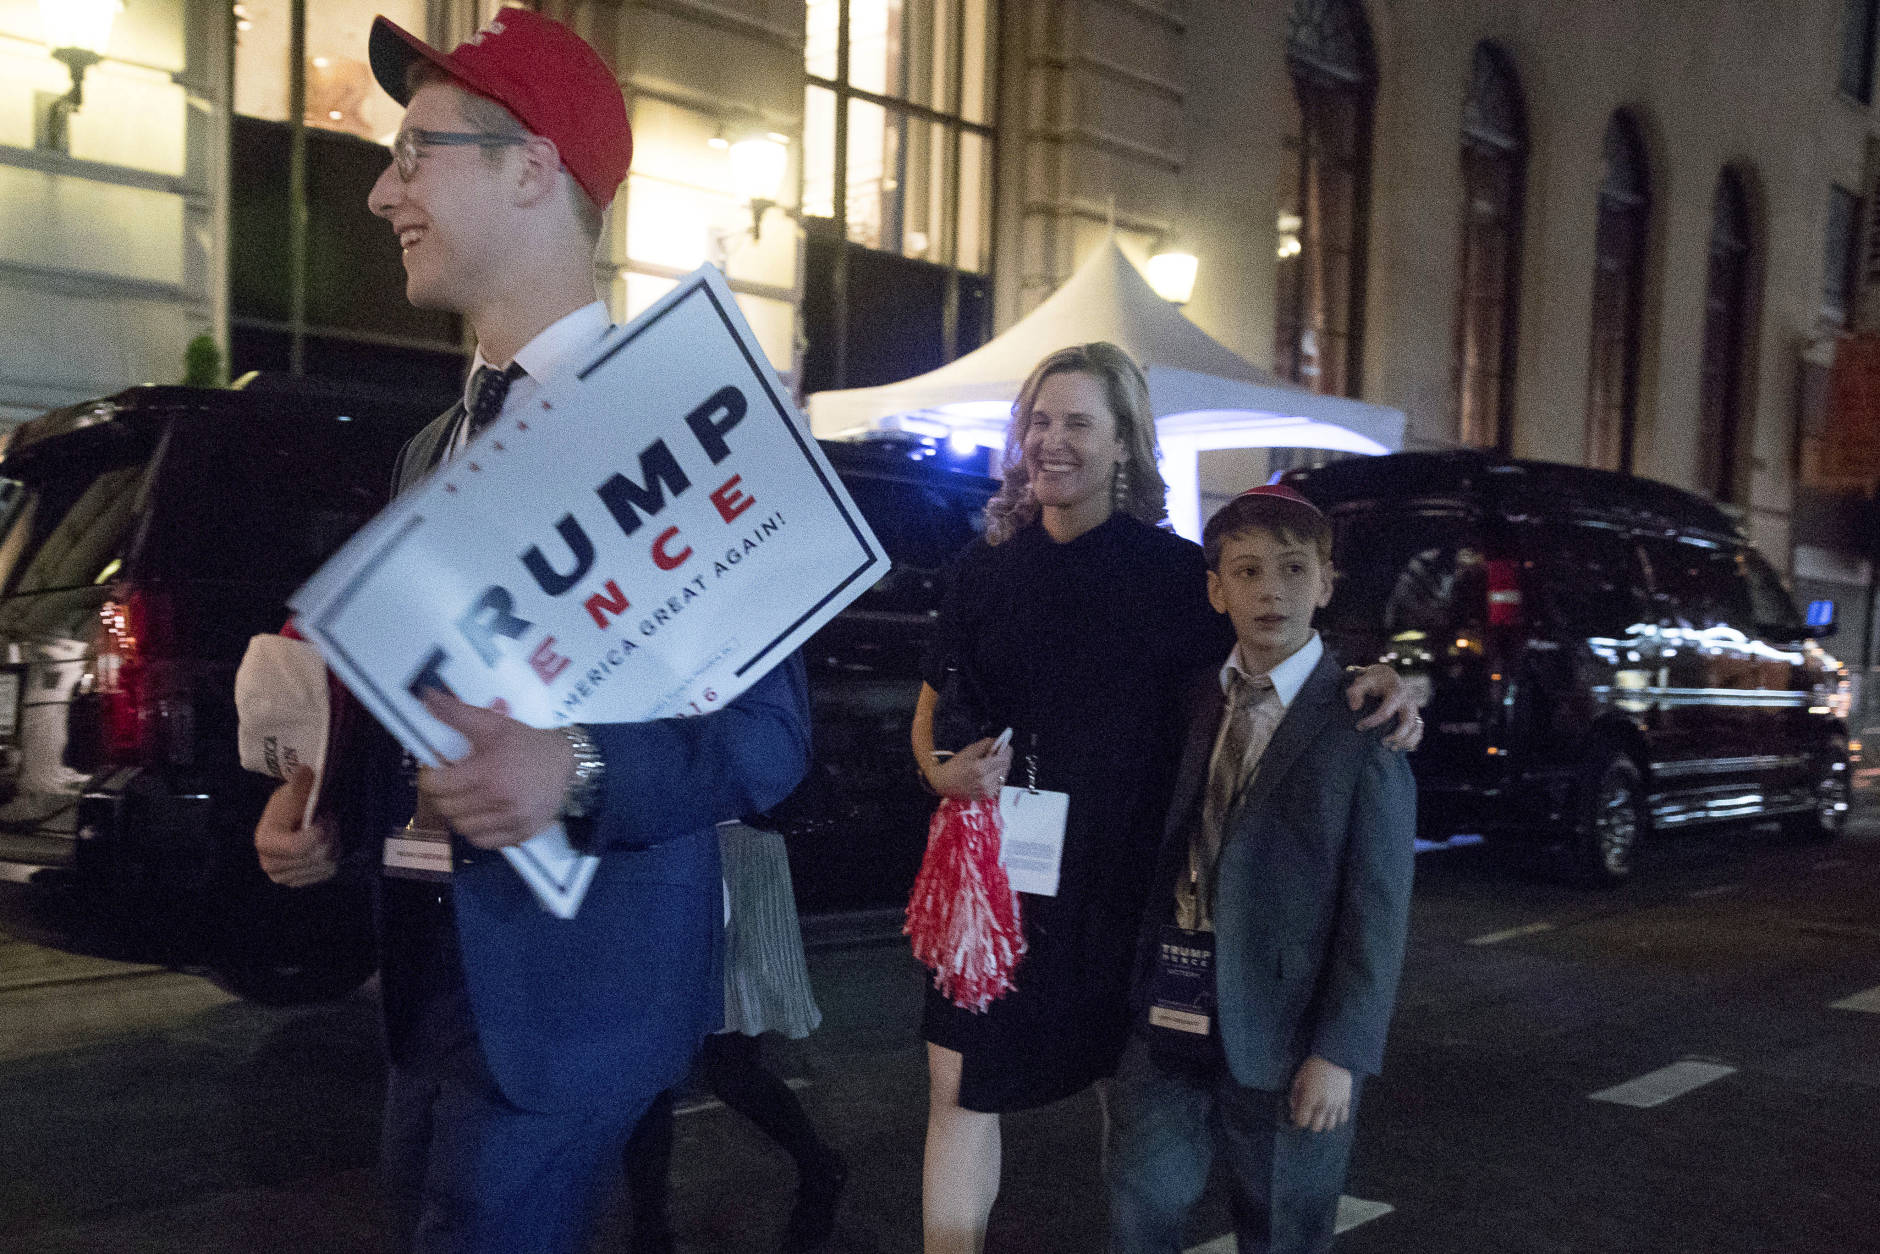 Supporters of President-elect Donald Trump walk past Hillary Clinton's motorcade outside at The Peninsula Hotel in New York, Wednesday, Nov. 9, 2016, after Clinton concedes the election to Donald Trump. (AP Photo/Andrew Harnik)